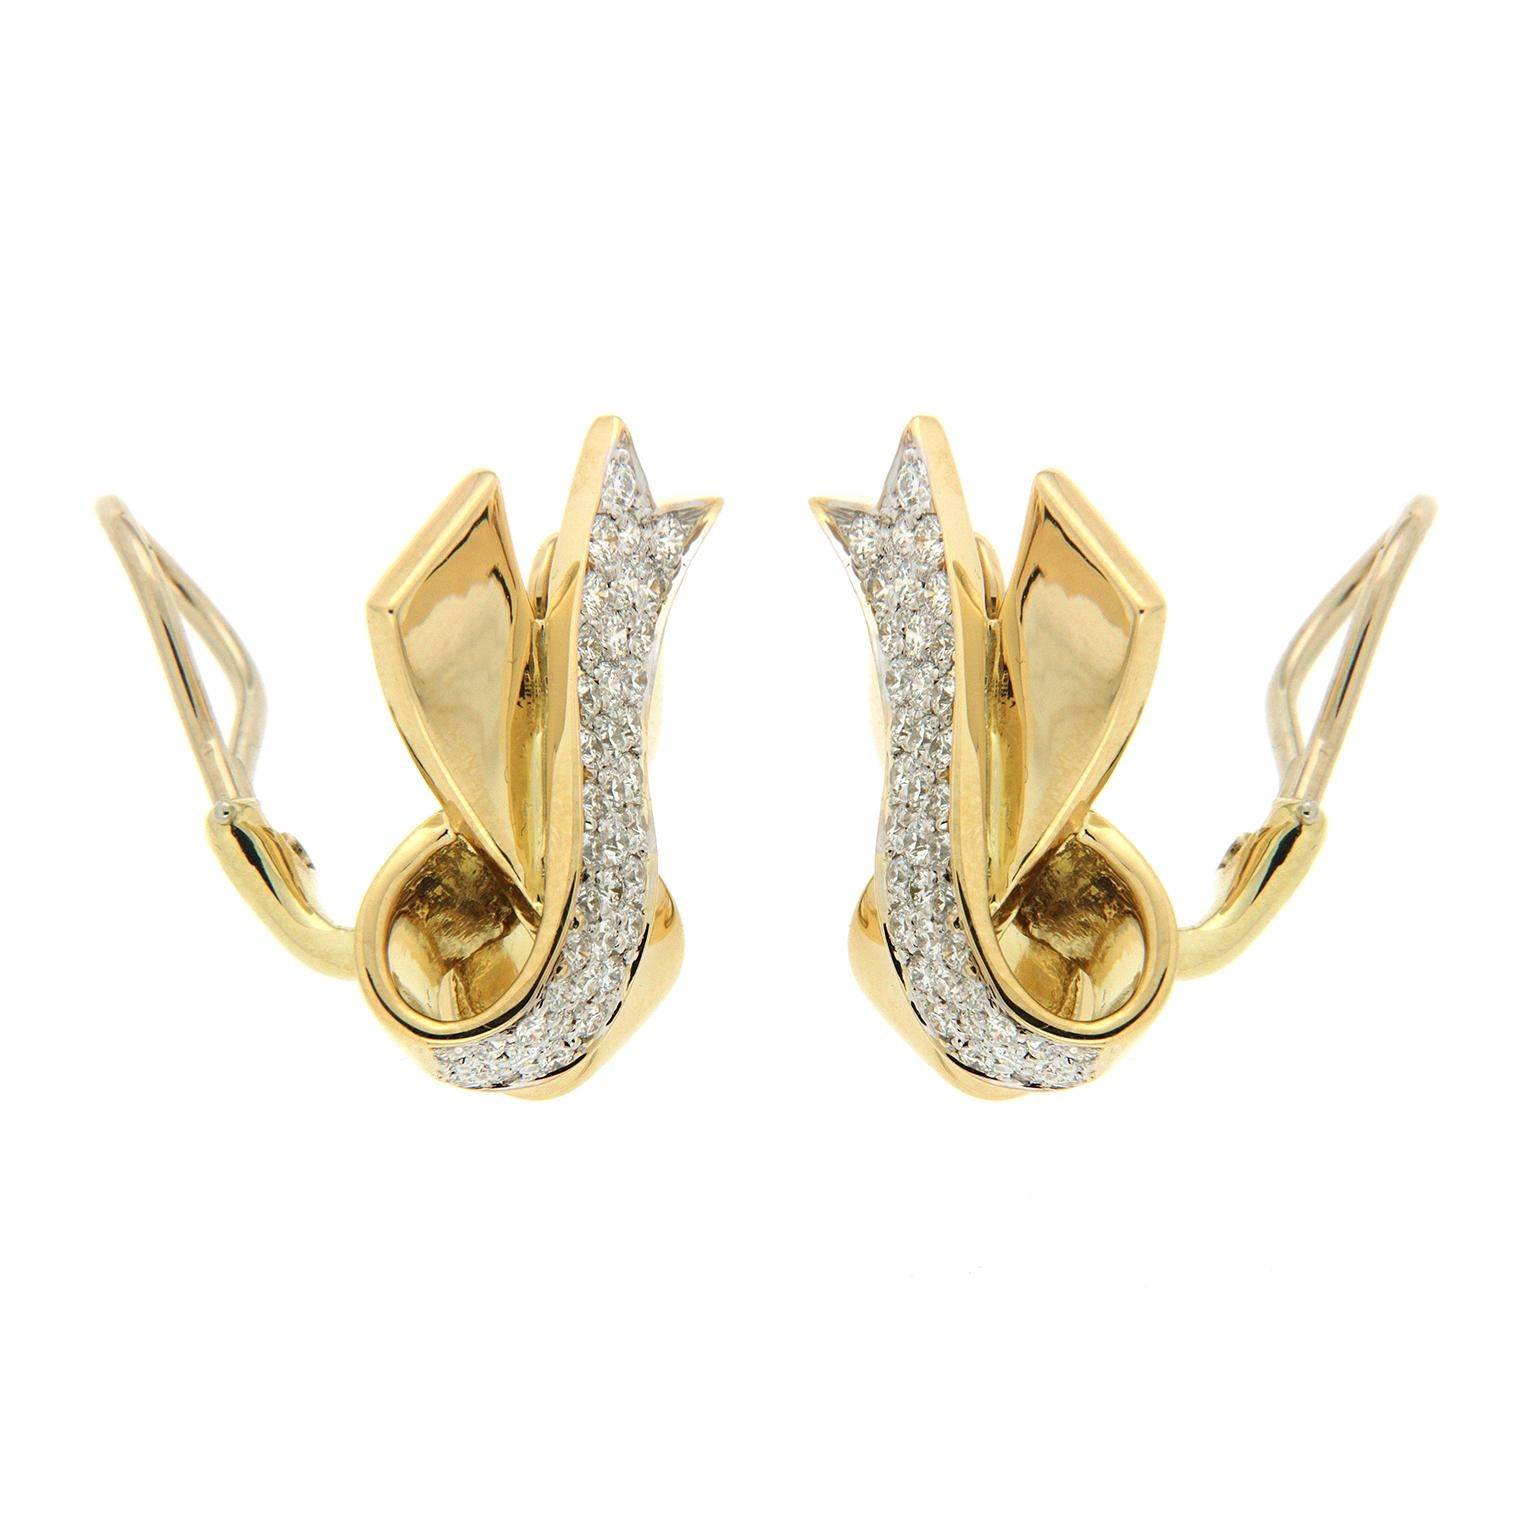 Valentin Magro Yellow Gold Pave Diamond Ribbon Earrings exhibit a playful note. Each earring has polished 18k yellow gold shaped into two ribbons that cross and fold over one another. The front most ribbons are encrusted in pave set round brilliant